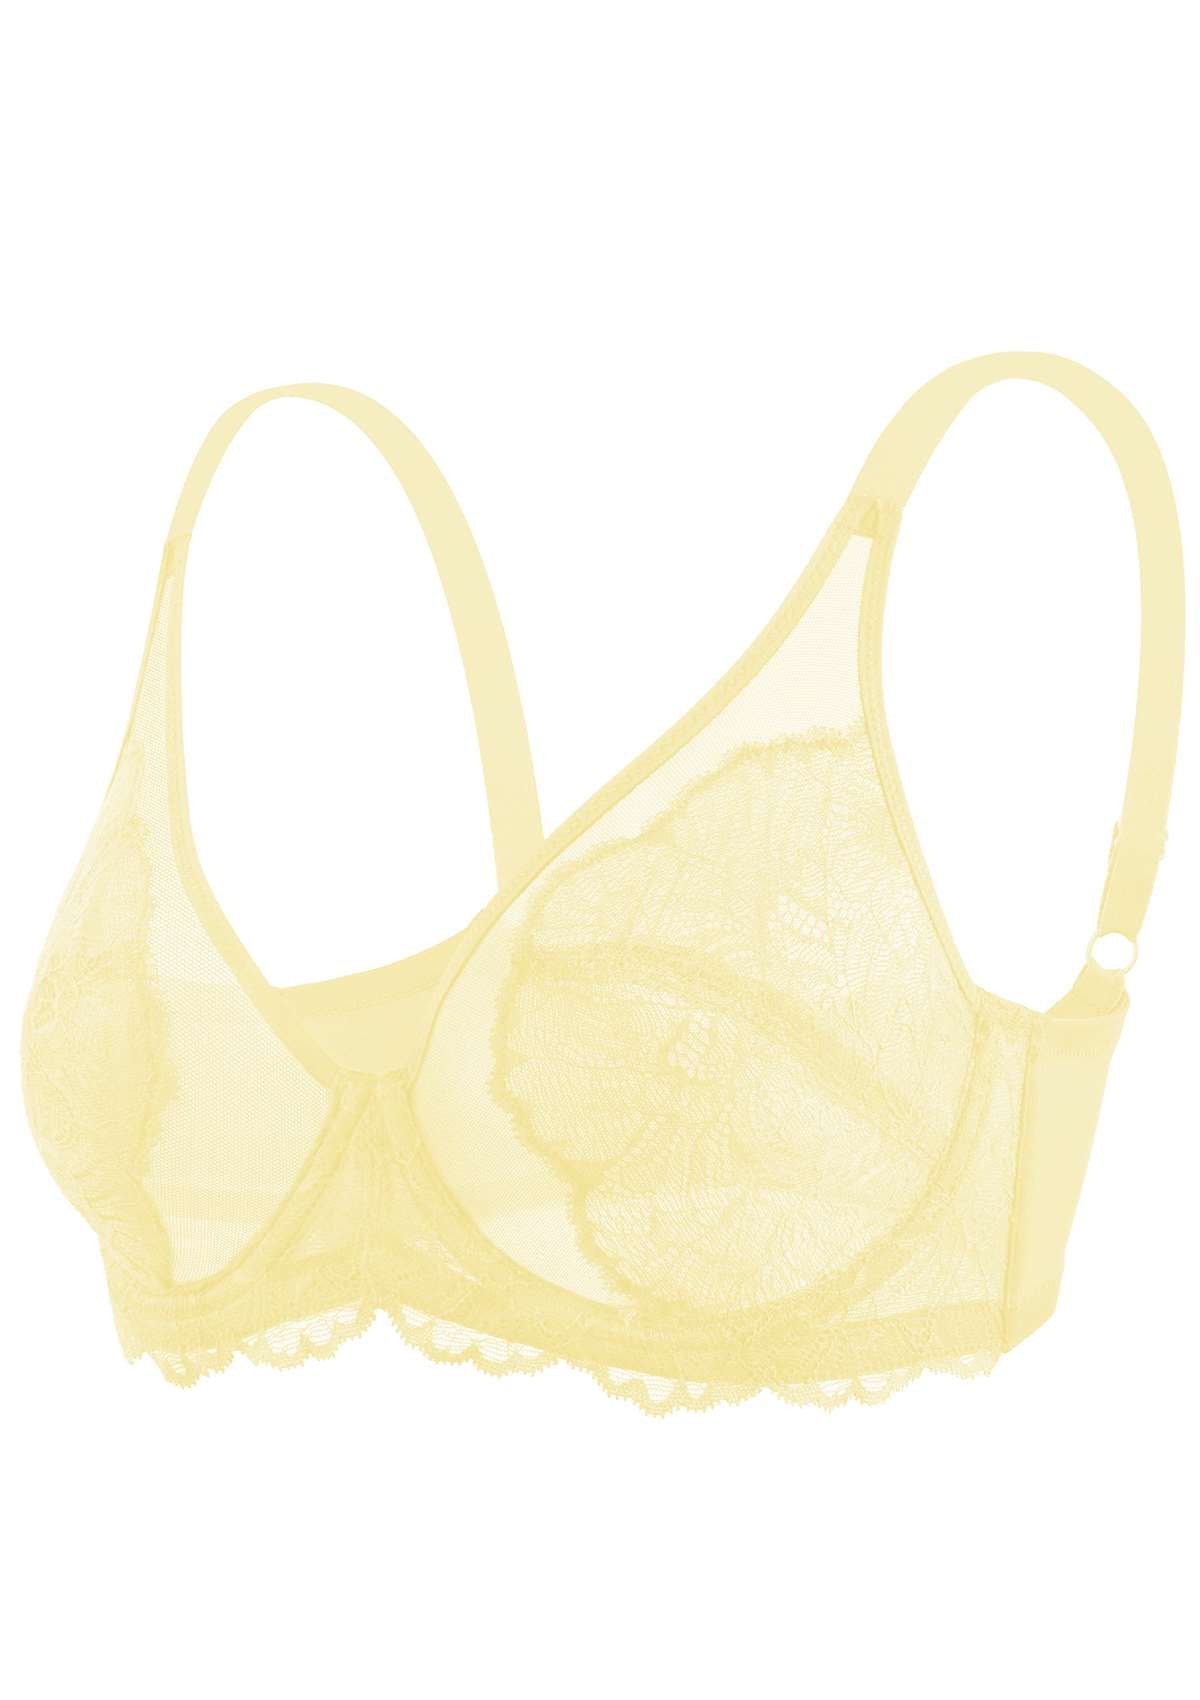 HSIA Blossom Full Coverage Side Support Bra: Designed For Heavy Busts - Light Yellow / 46 / DD/E